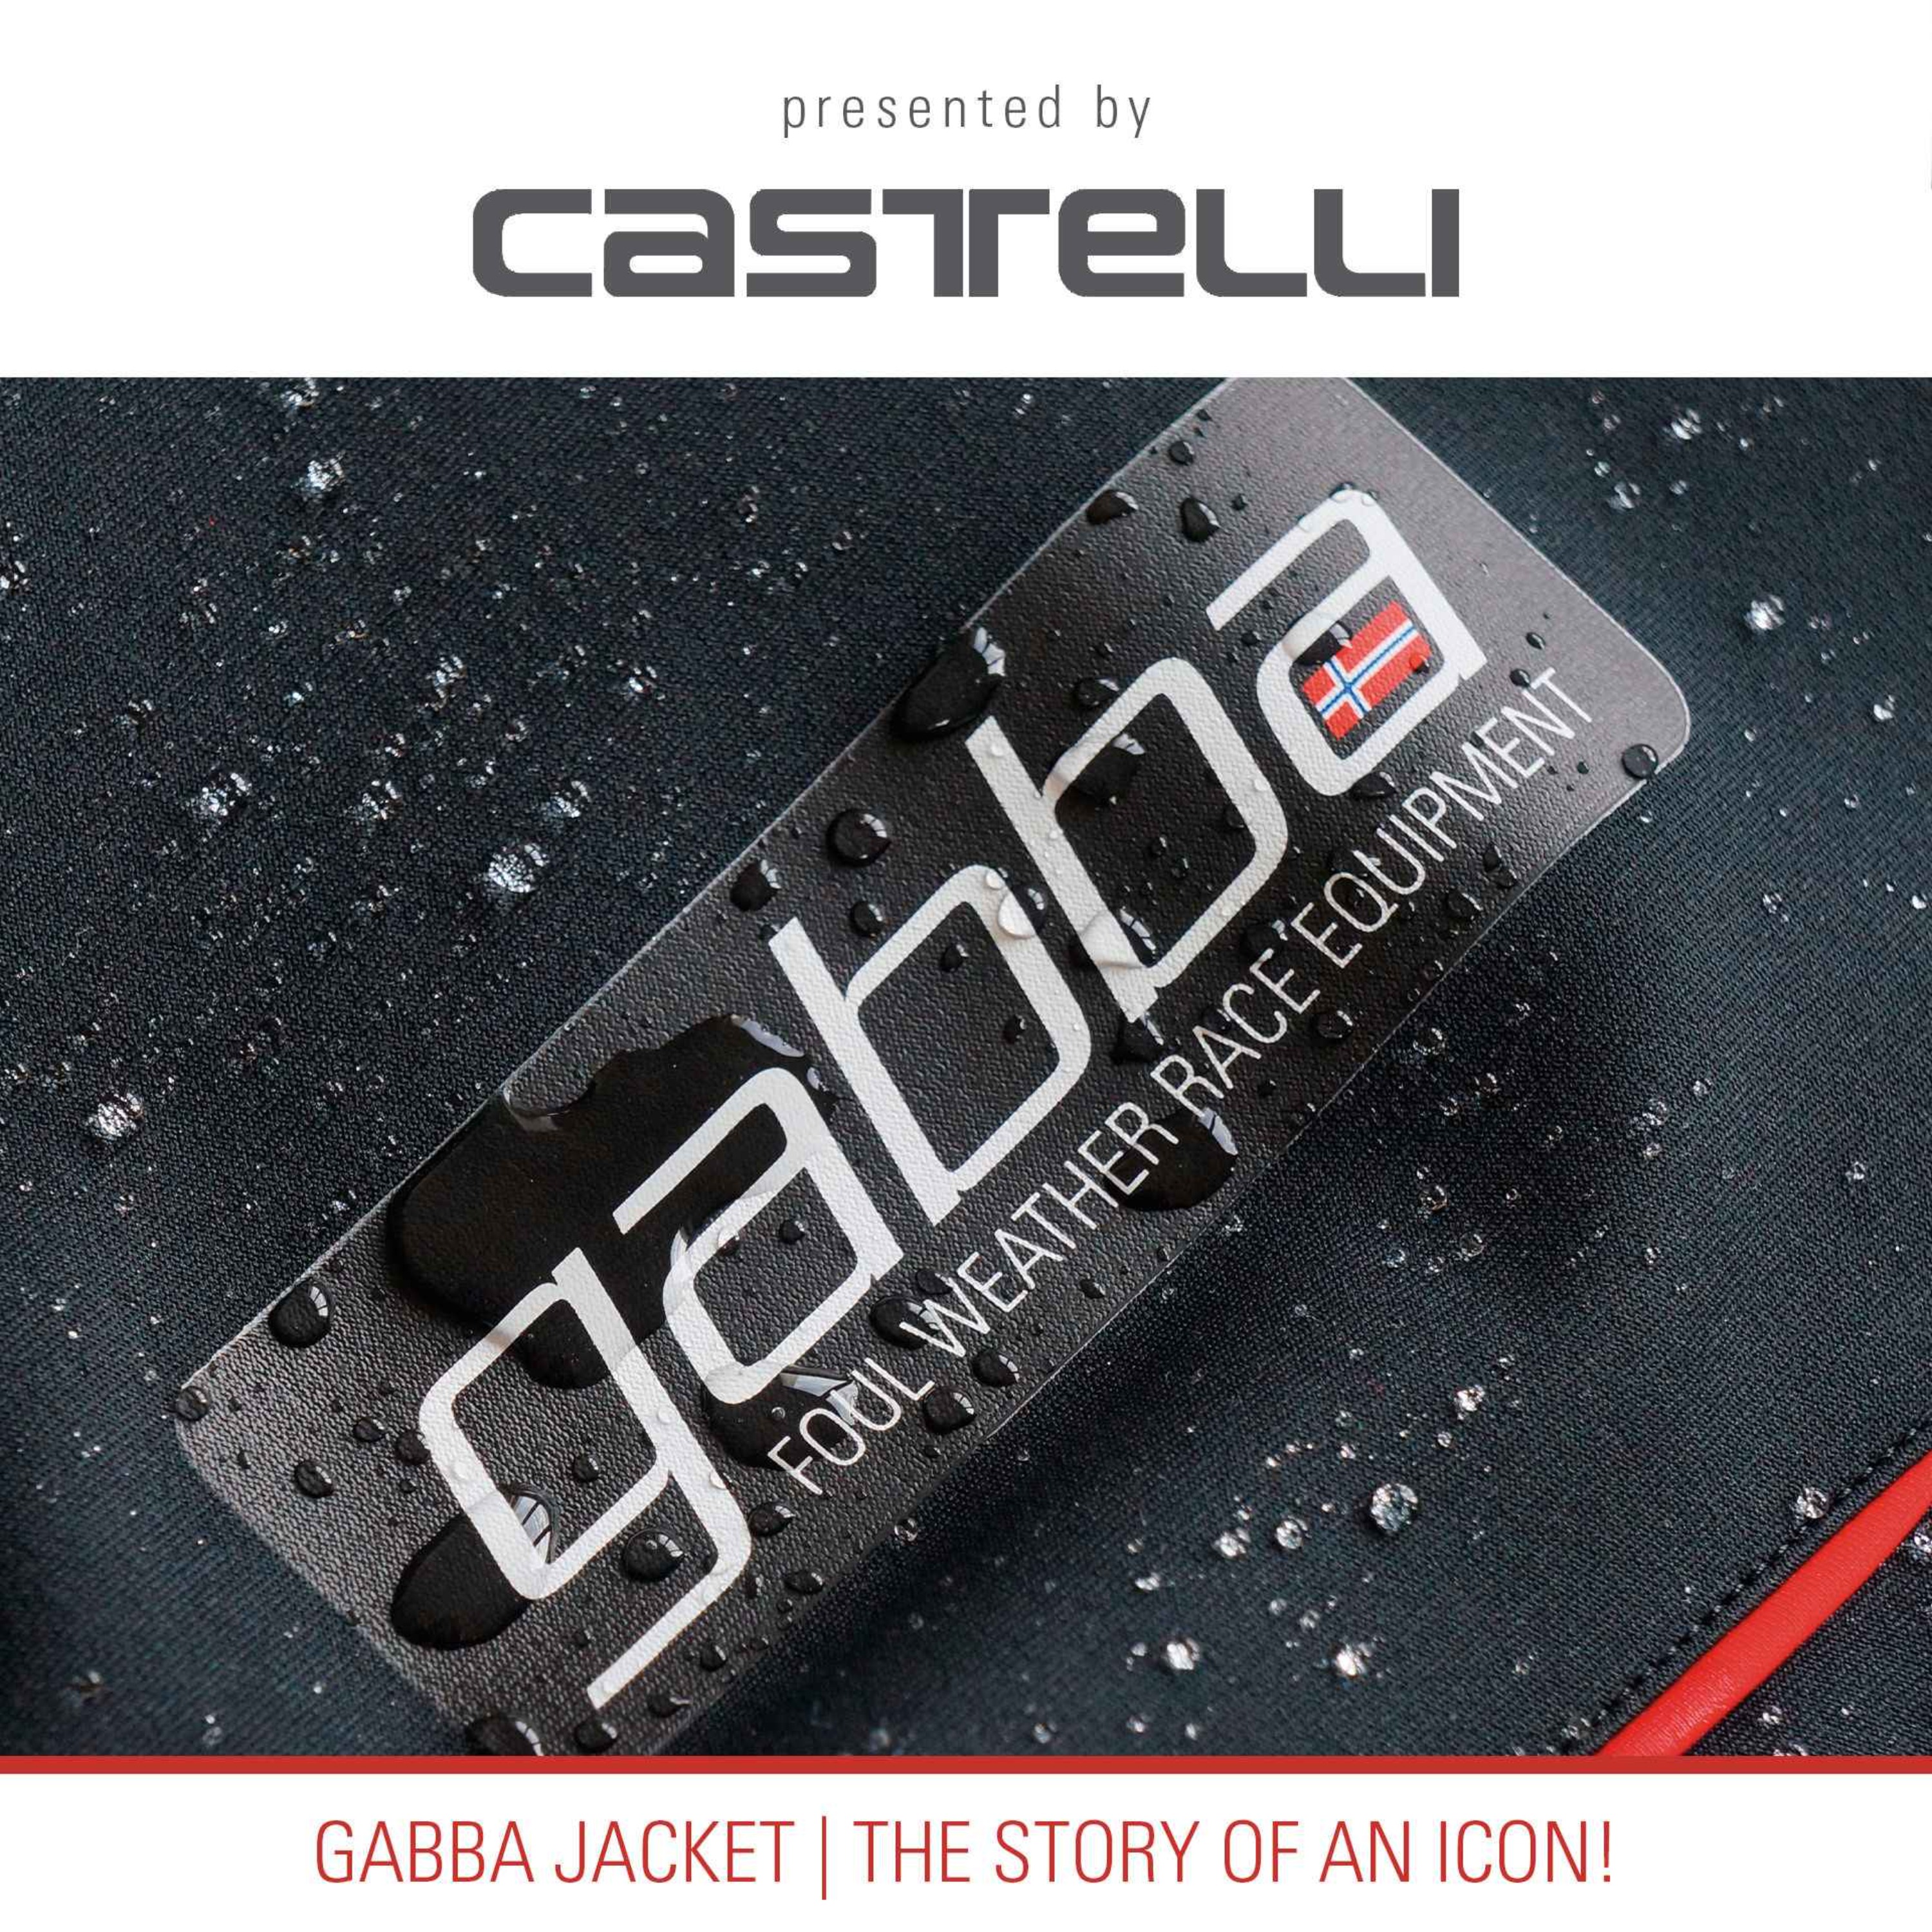 Gabba Jacket, The Story Of An Icon!